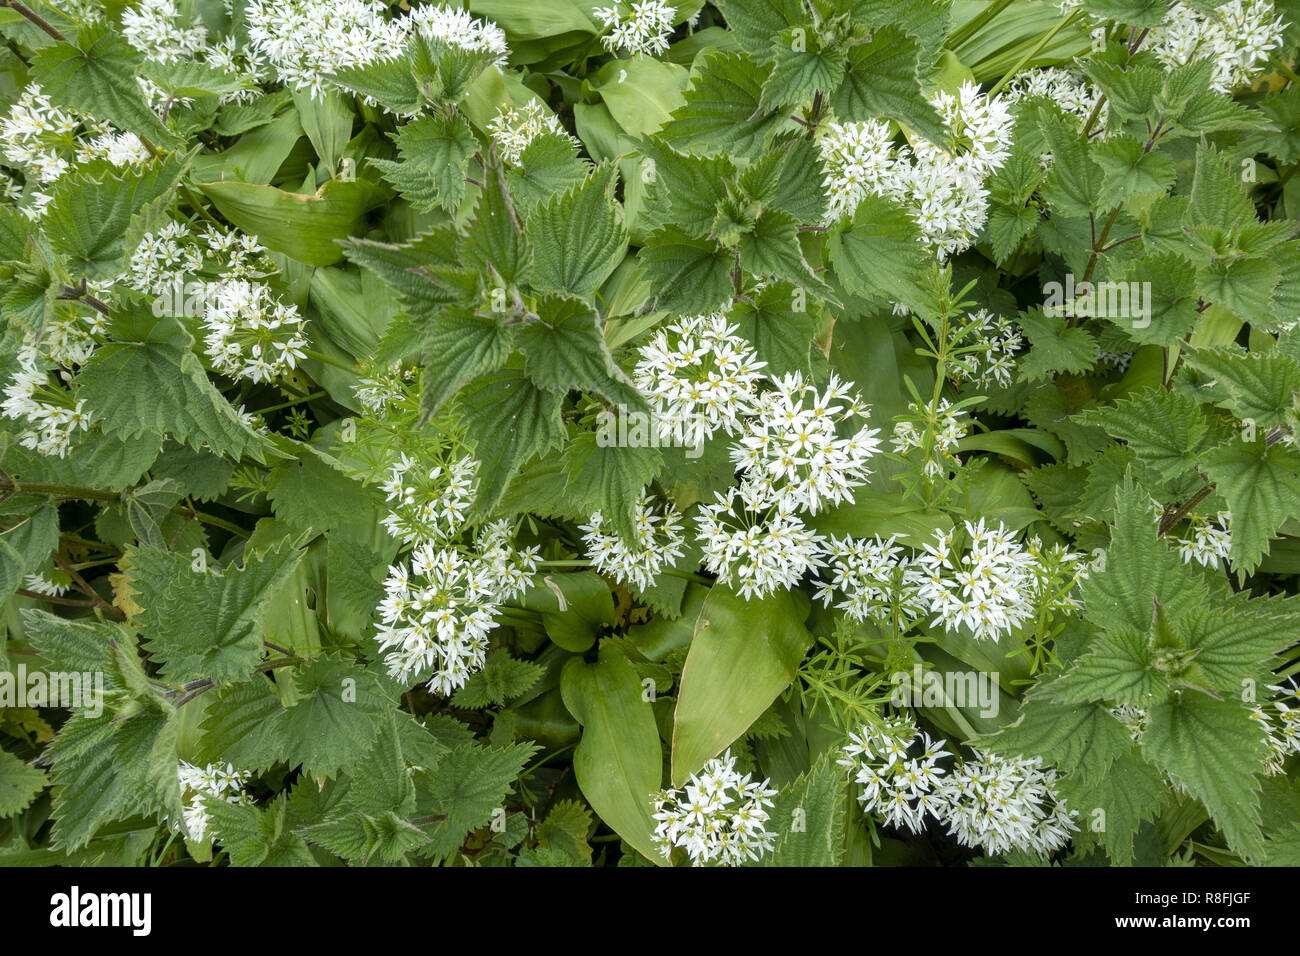 Allium ursinum also known as wild garlic, a bulbous perennial flowering plant growing in woodland in Hampshire, England, UK Stock Photo